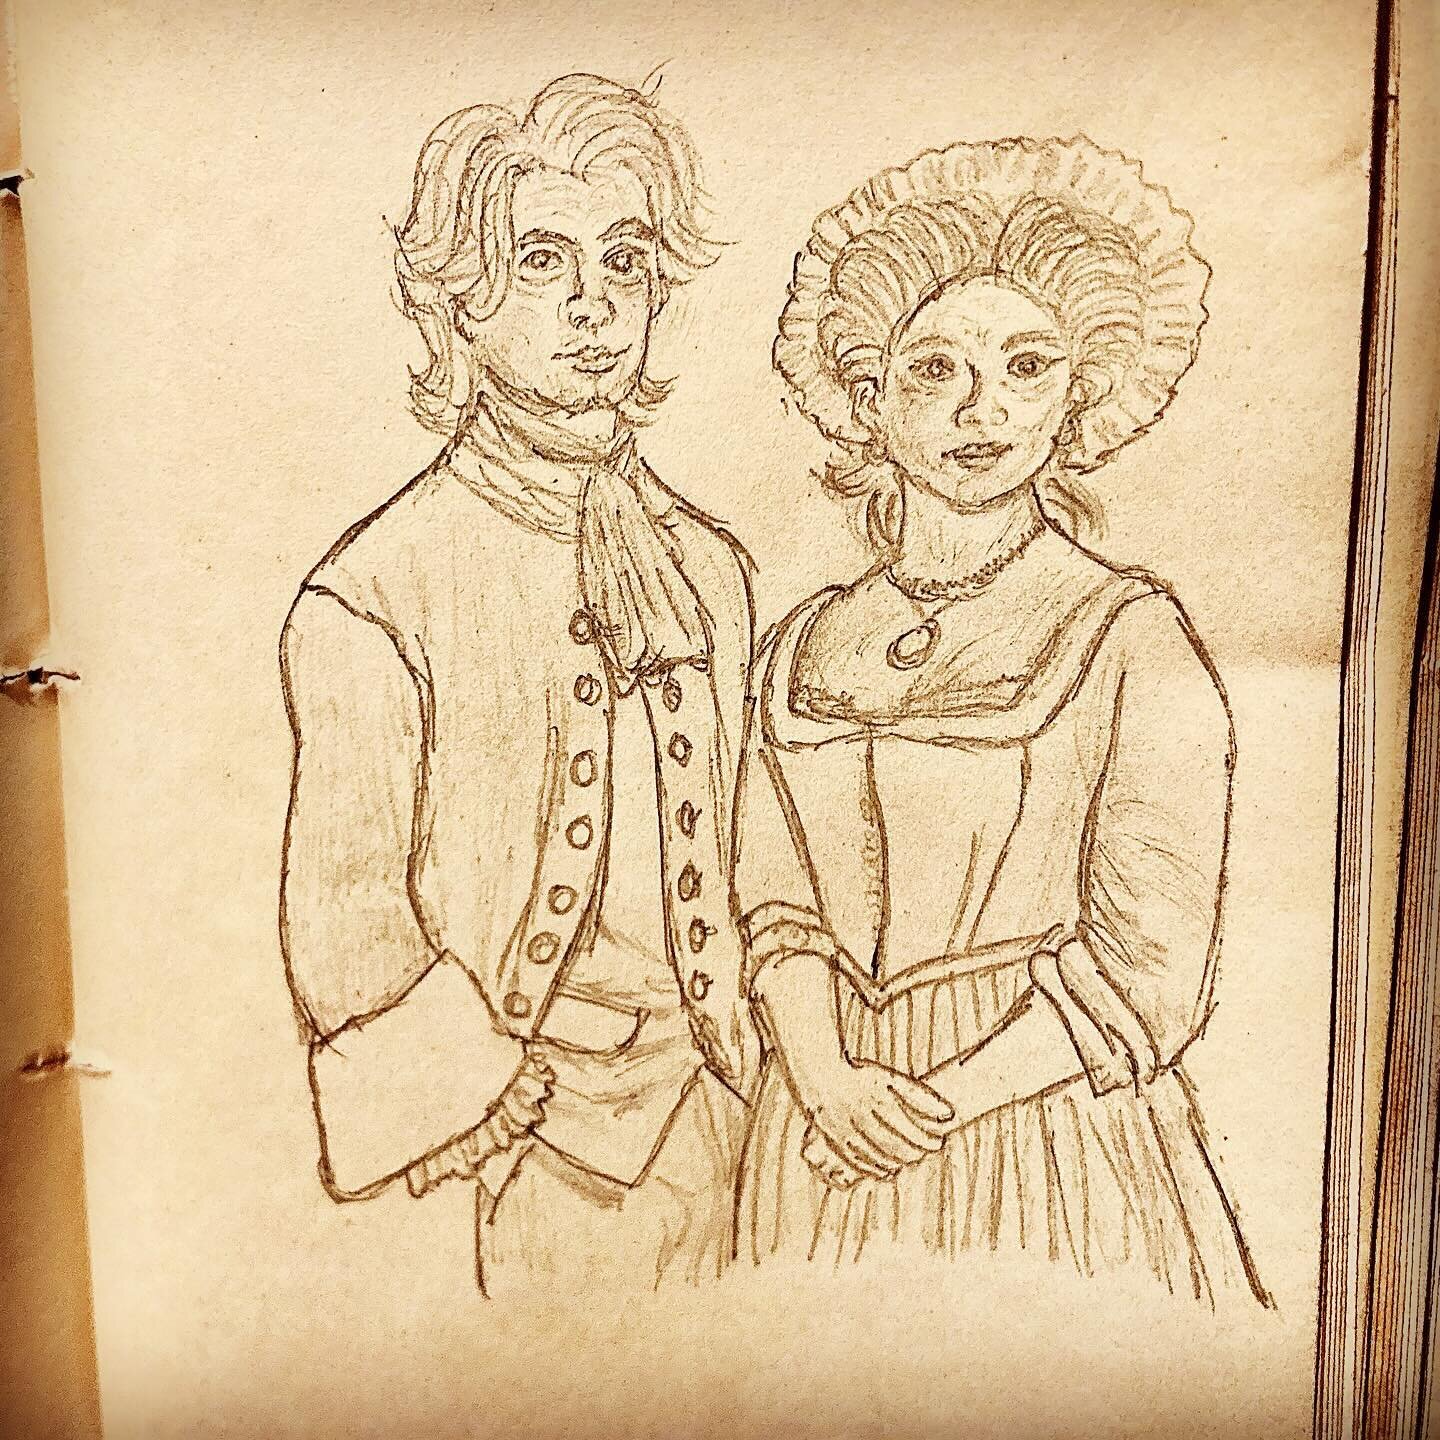 ✍️ Cecelia&rsquo;s Sketchbook

🇫🇷 From France to servitude: James and Bridgette Rousseau came to England lured by a promise of land management by Baron Henry Rowley, but life had other plans. Instead of overseeing lands, they found themselves trapp